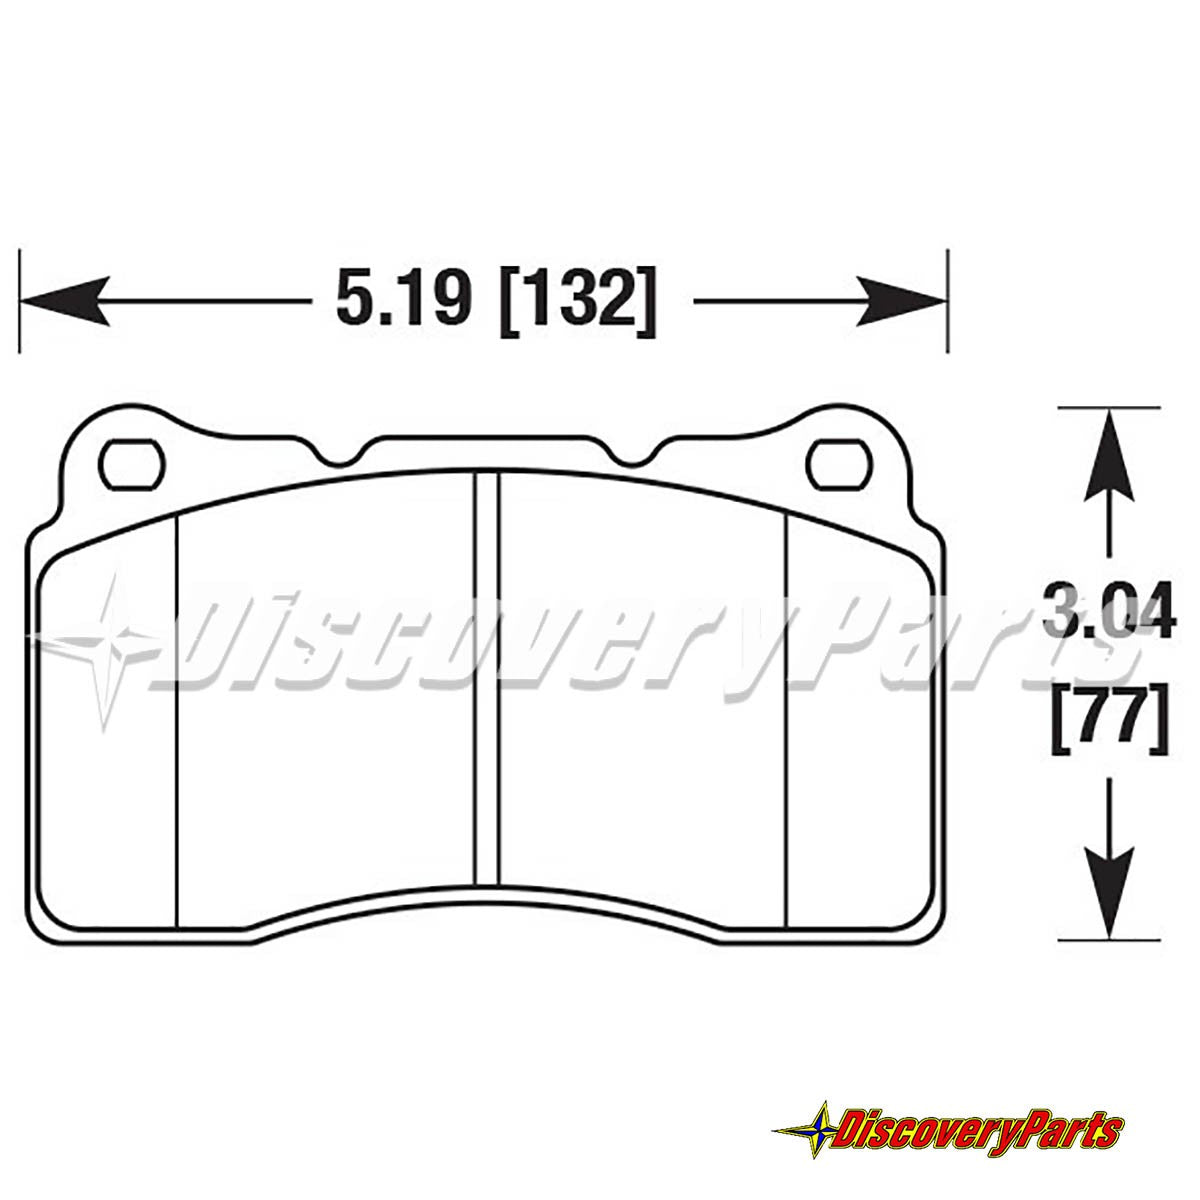 Carbotech CT1001A Brake Pads Brembo Calipers